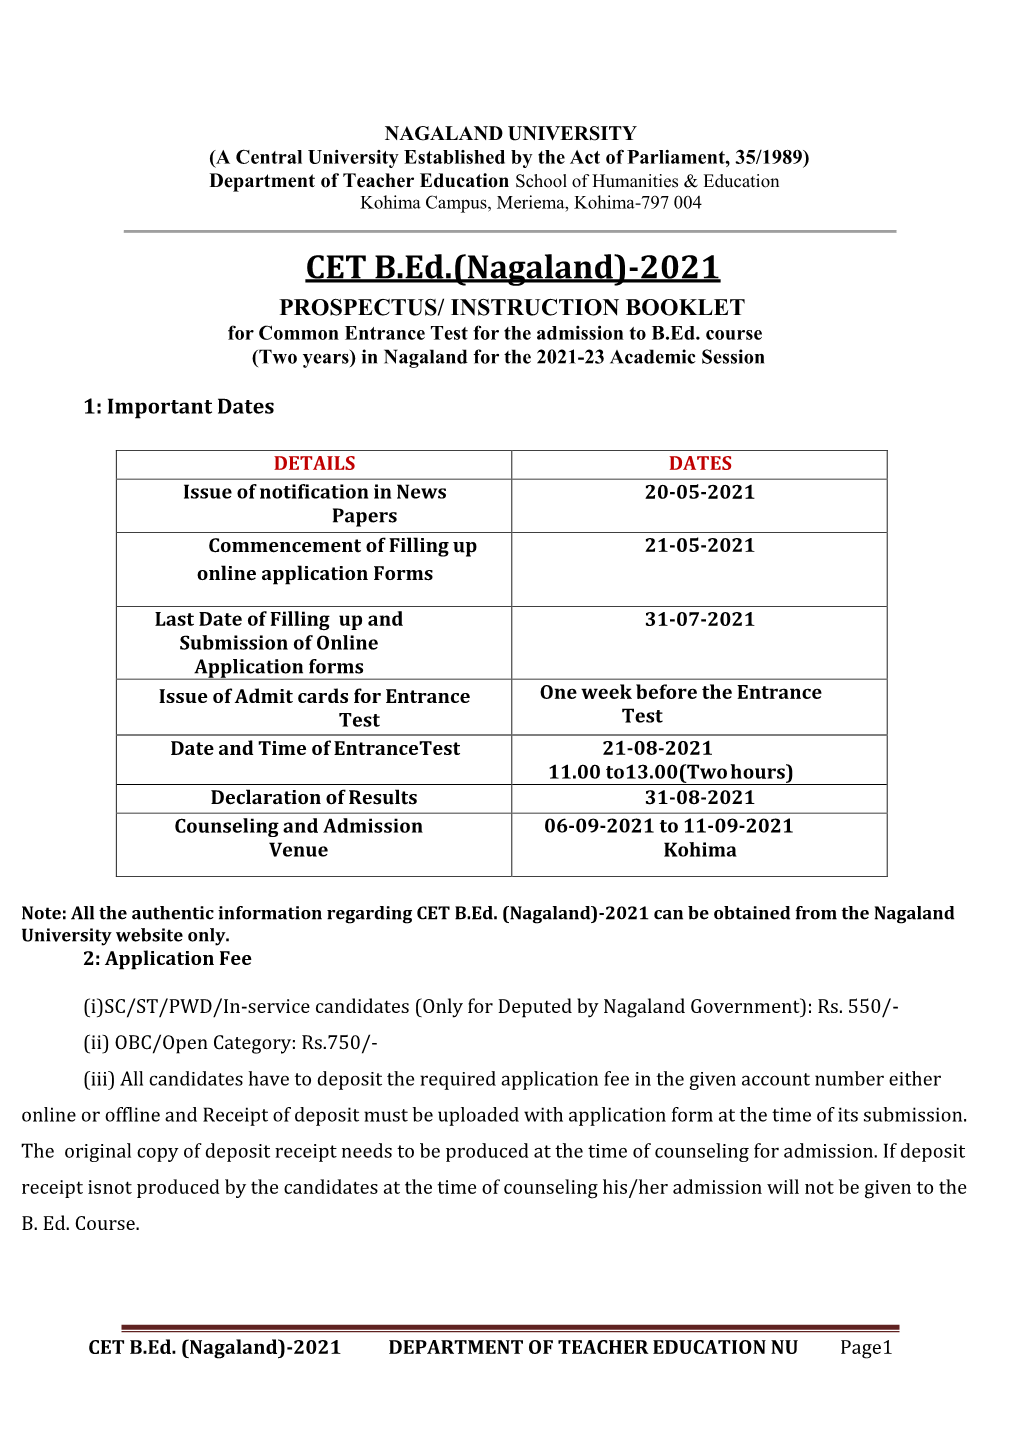 CET B.Ed.(Nagaland)-2021 PROSPECTUS/ INSTRUCTION BOOKLET for Common Entrance Test for the Admission to B.Ed